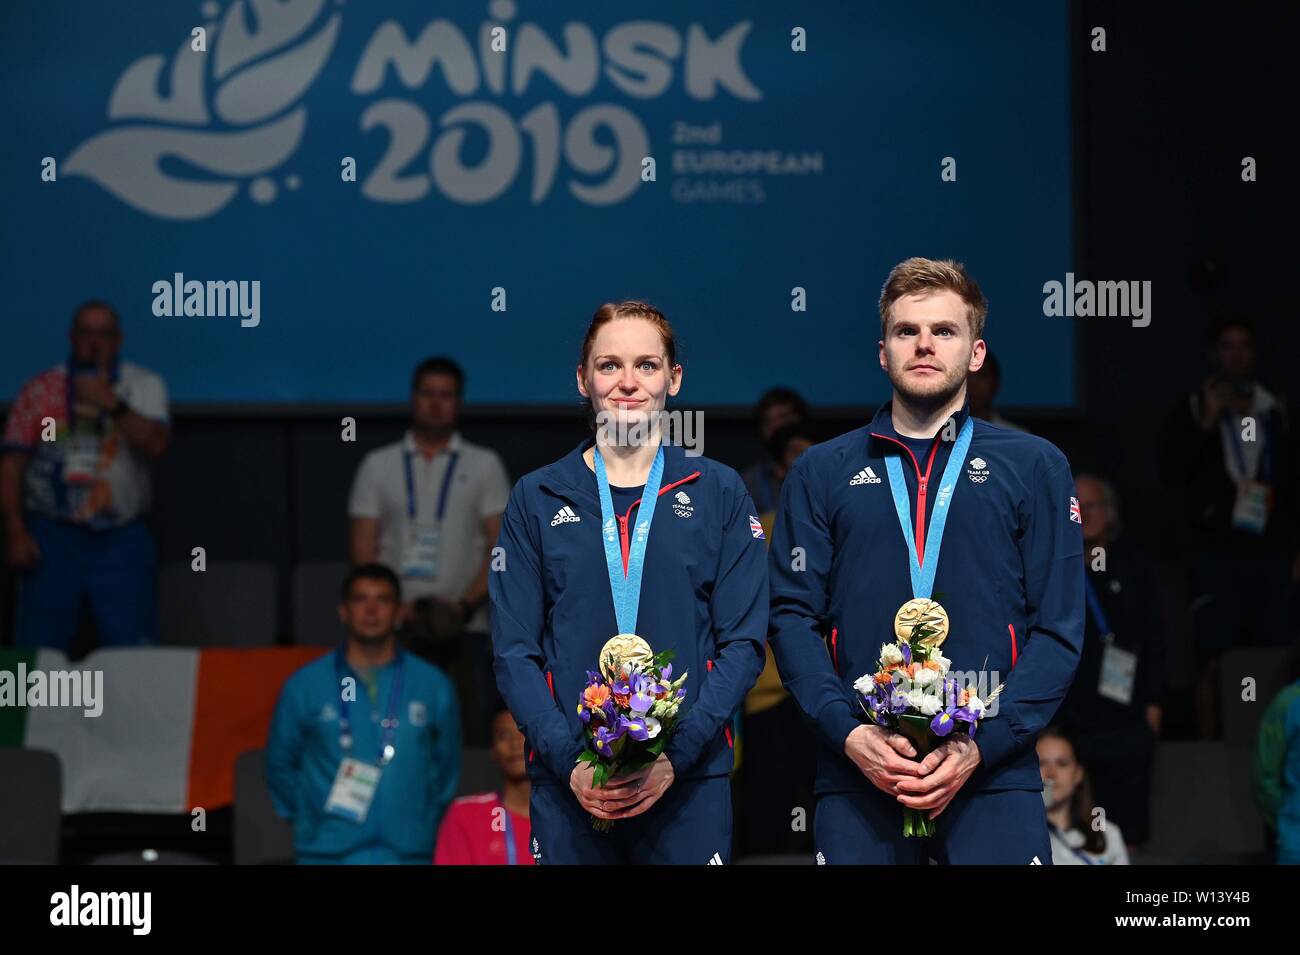 Minsk. Belarus. 30 June 2019. Lauren Smith and Marcus Ellis (GBR) in the badminton mixed doubles final with their Gold medals at the 2nd European games. Credit Garry Bowden/SIP photo agency/Alamy live news. Stock Photo